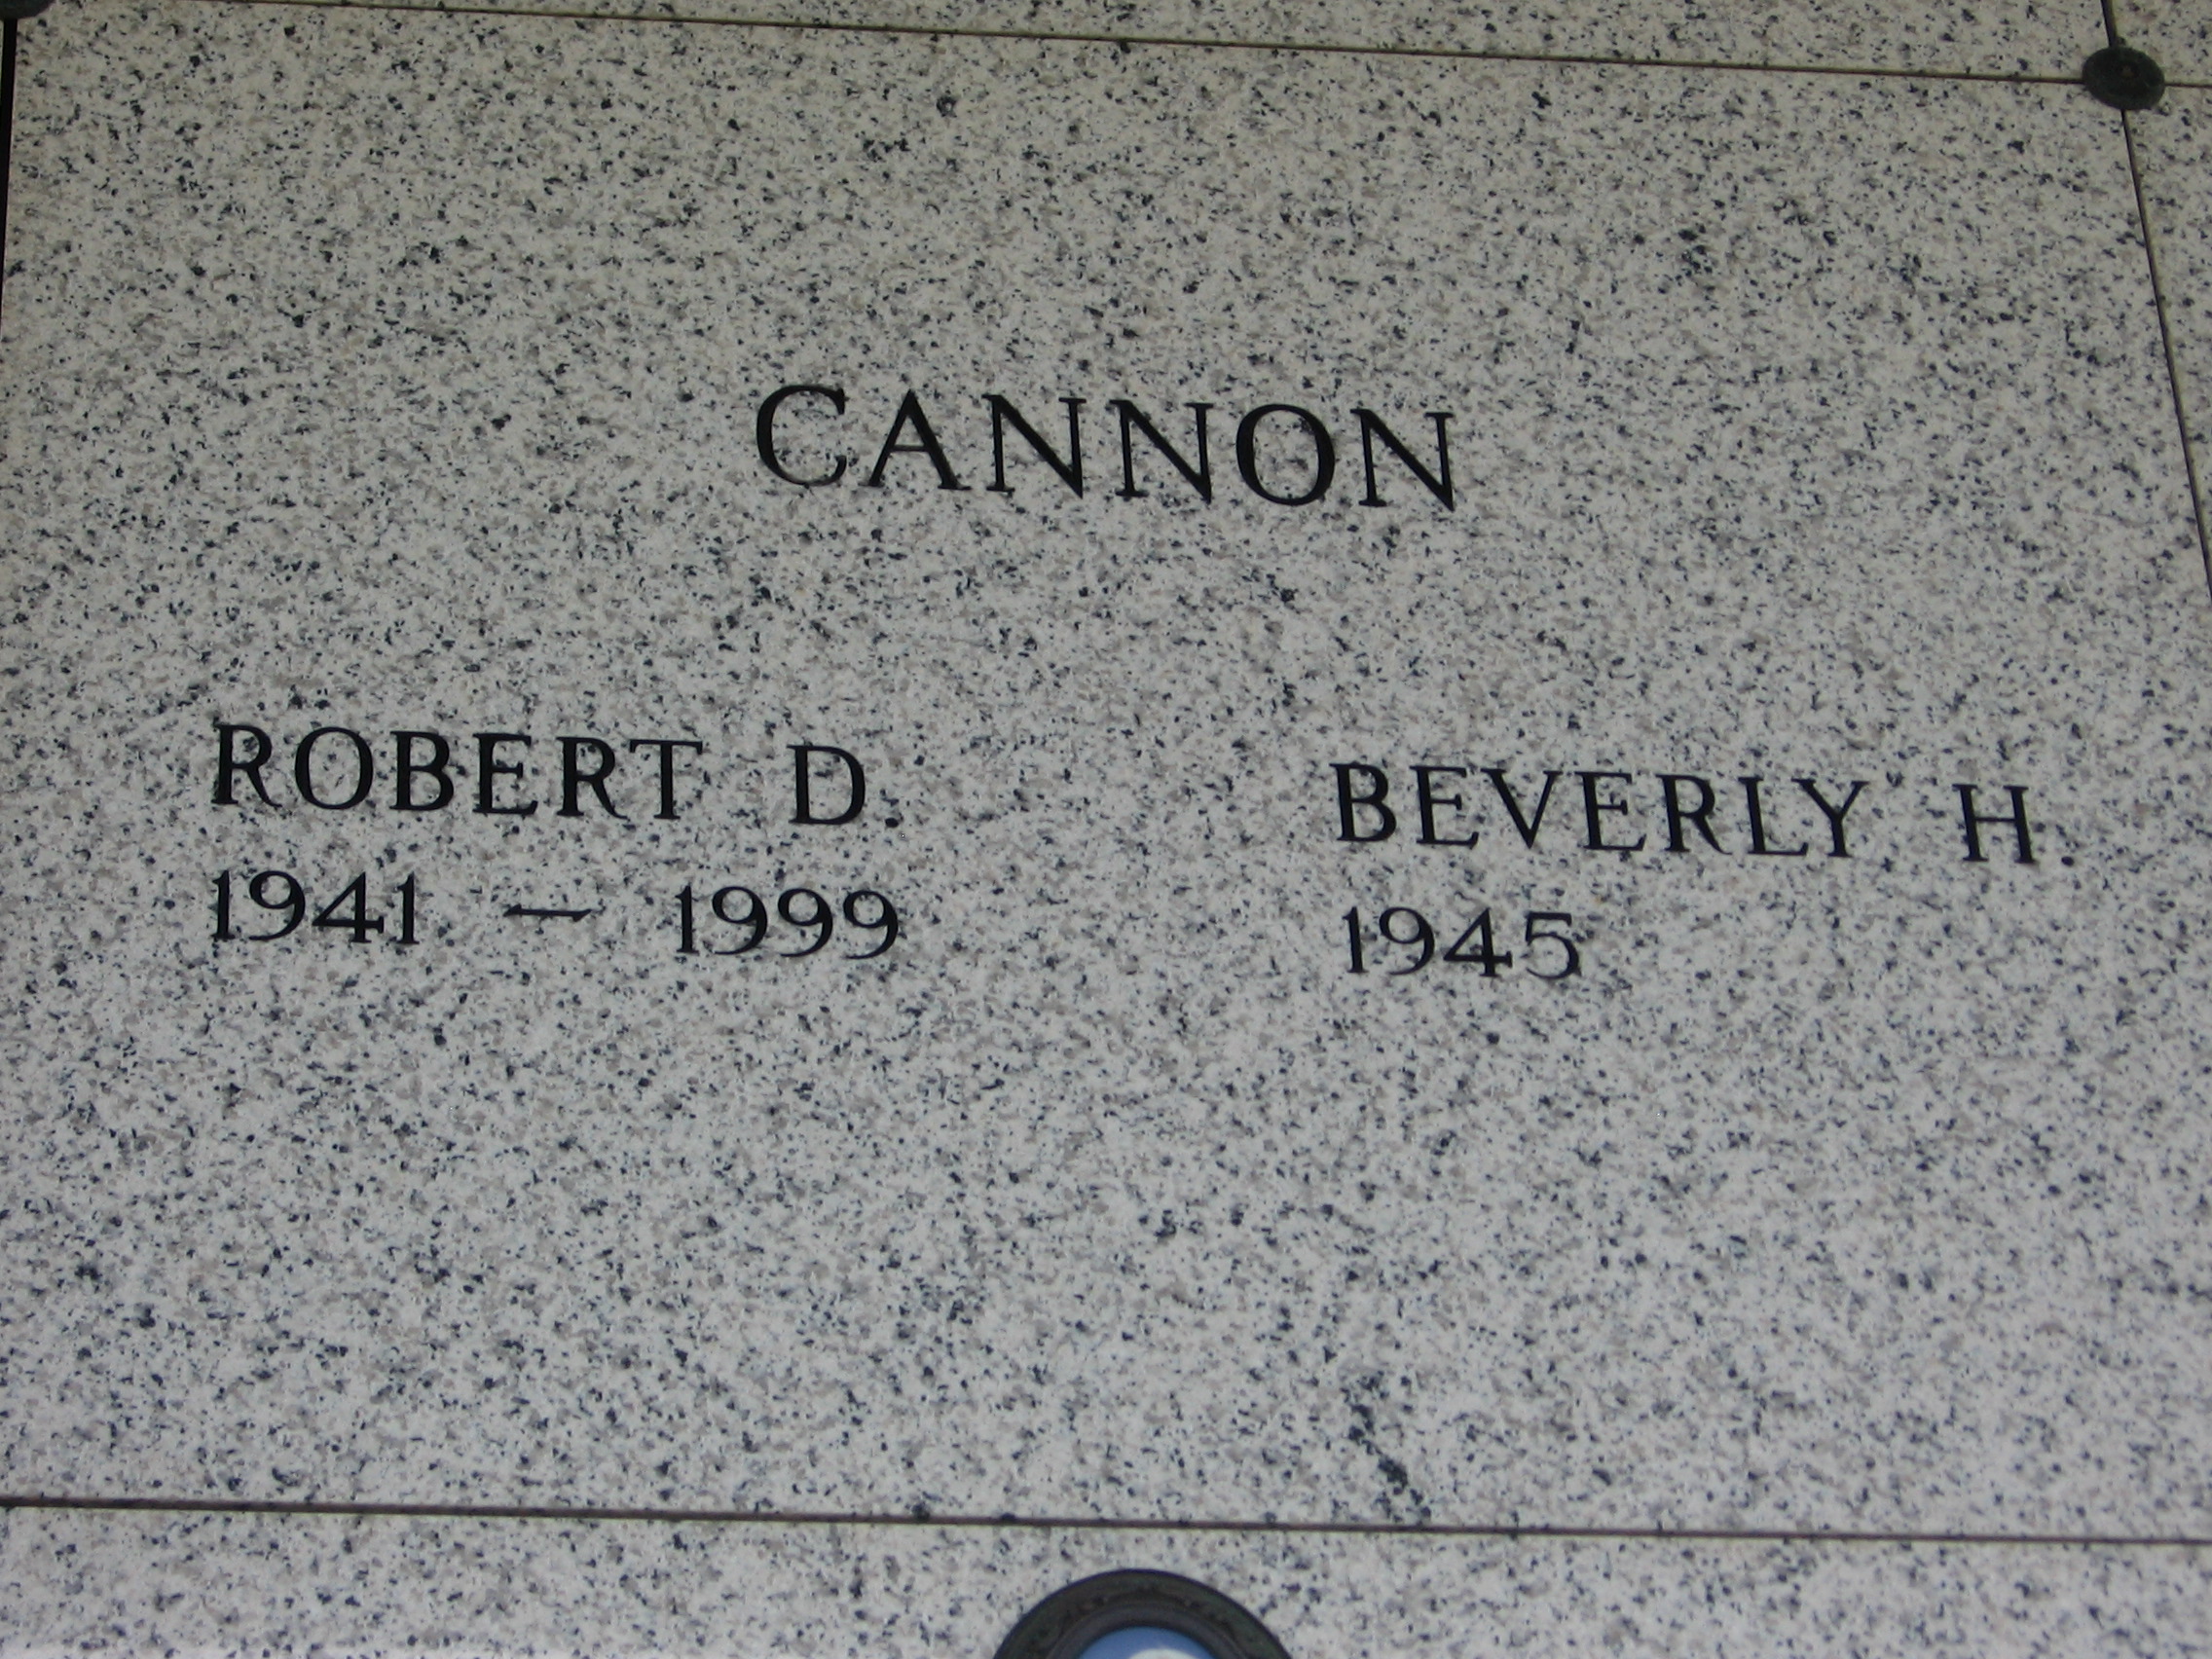 Beverly H Cannon